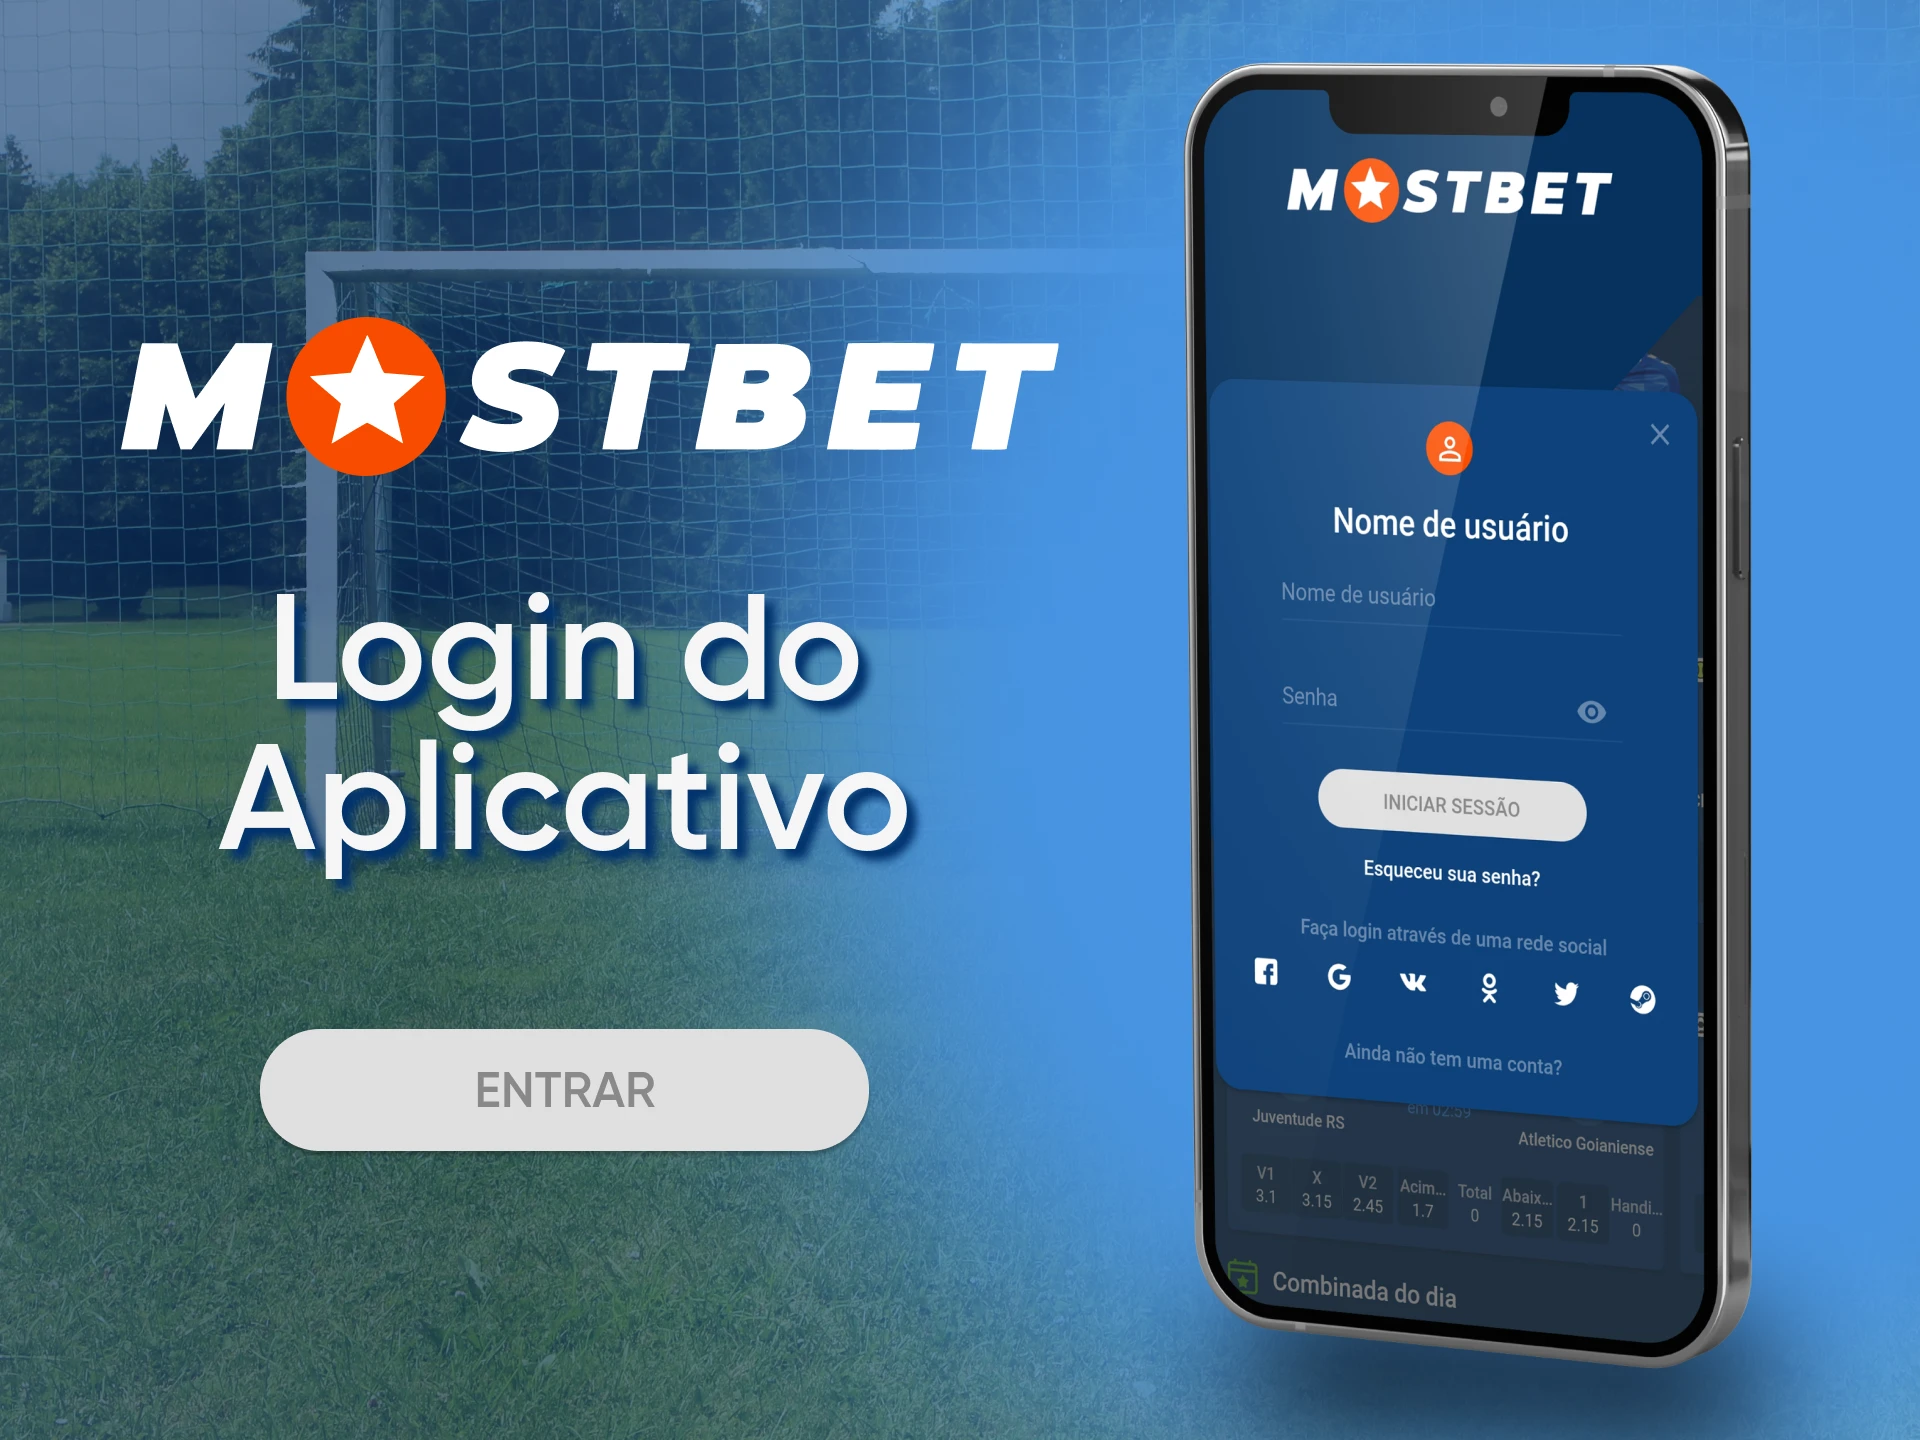 Use this instruction to login to your Mostbet account.